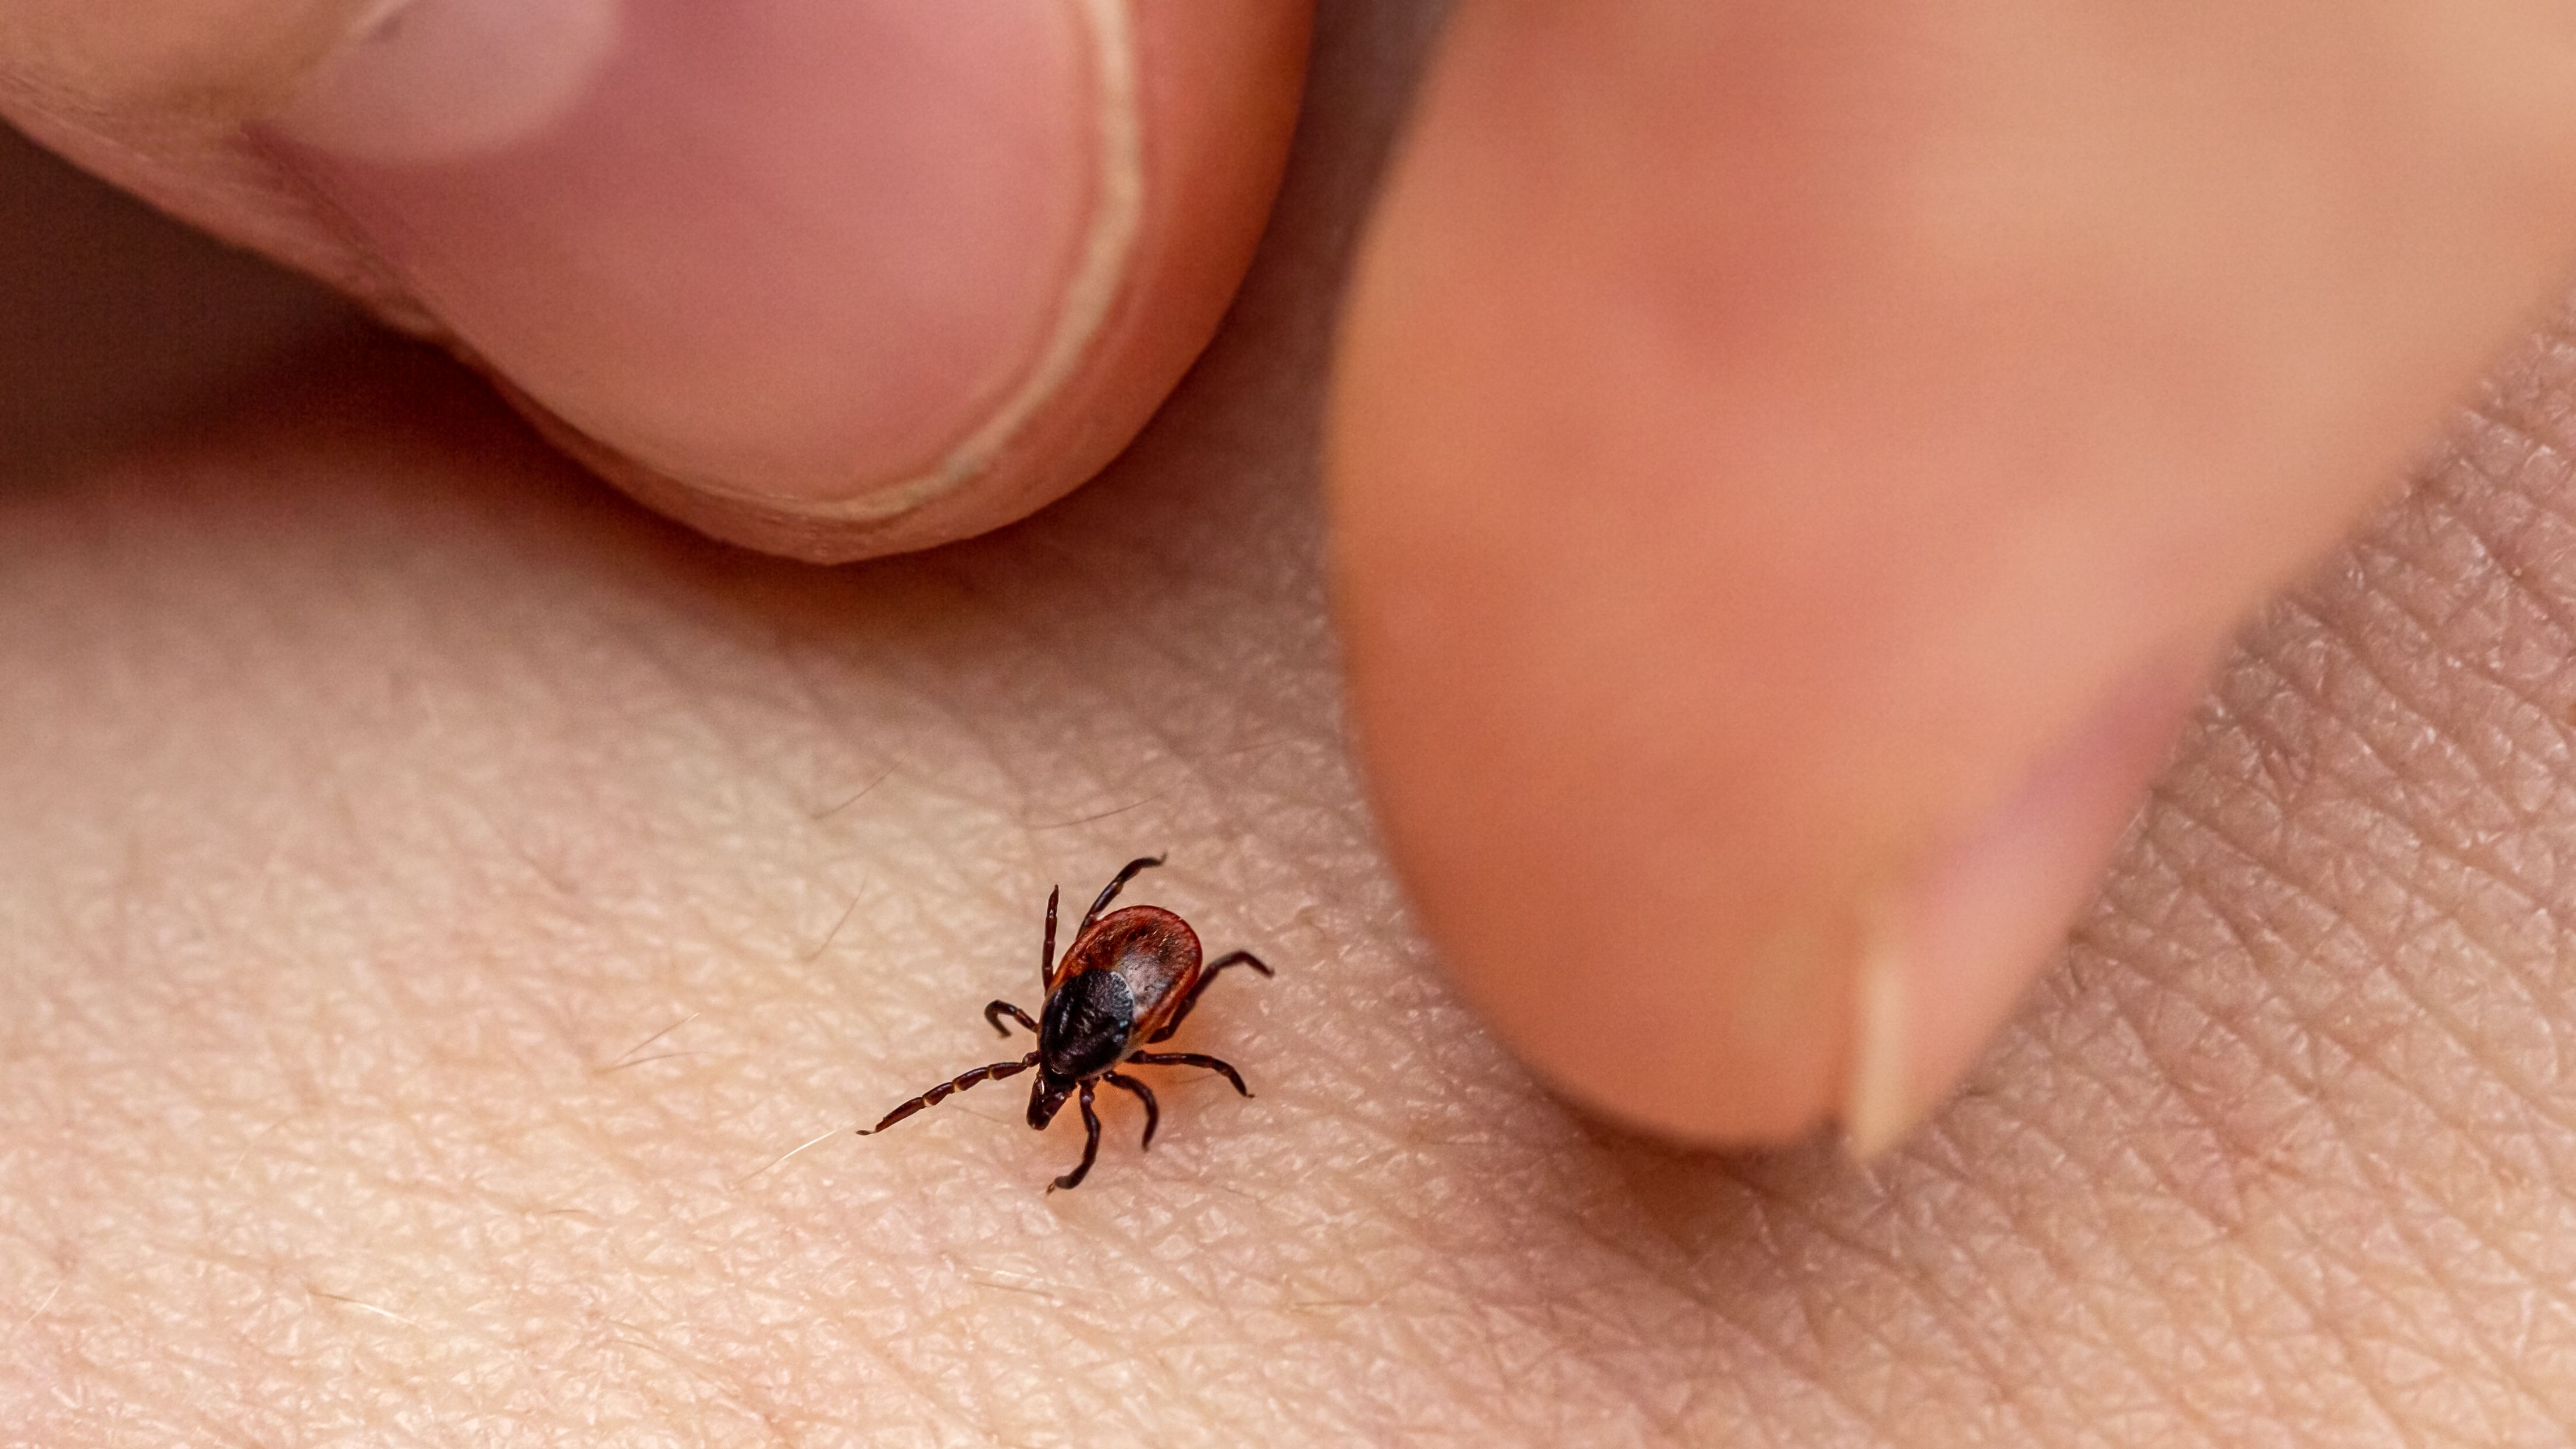 How to Remove a Tick Head Stuck in Your Skin - Tick Head Removal Steps